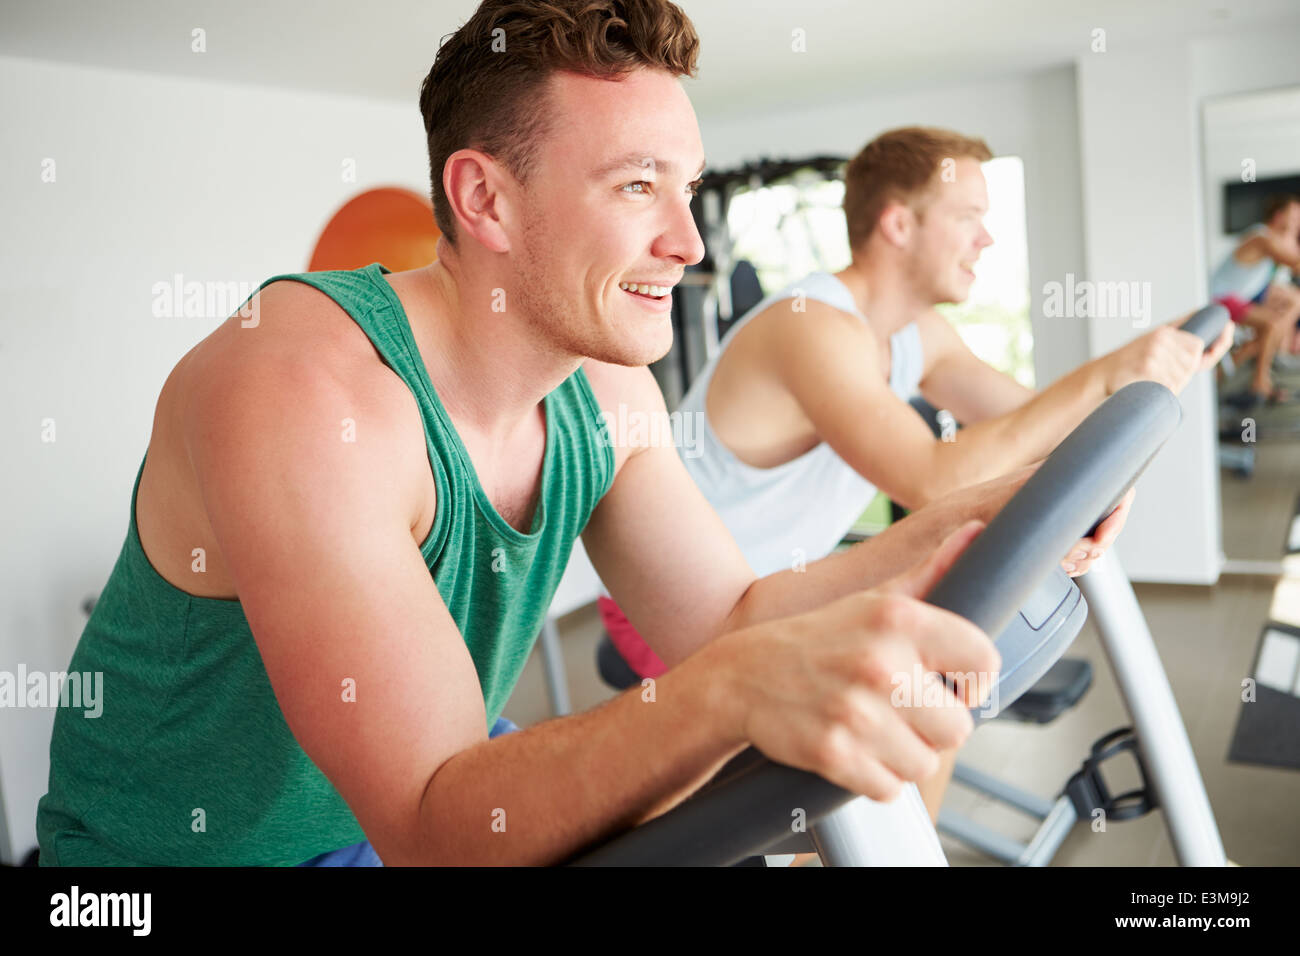 Two Young Men Training In Gym On Cycling Machines Together Stock Photo